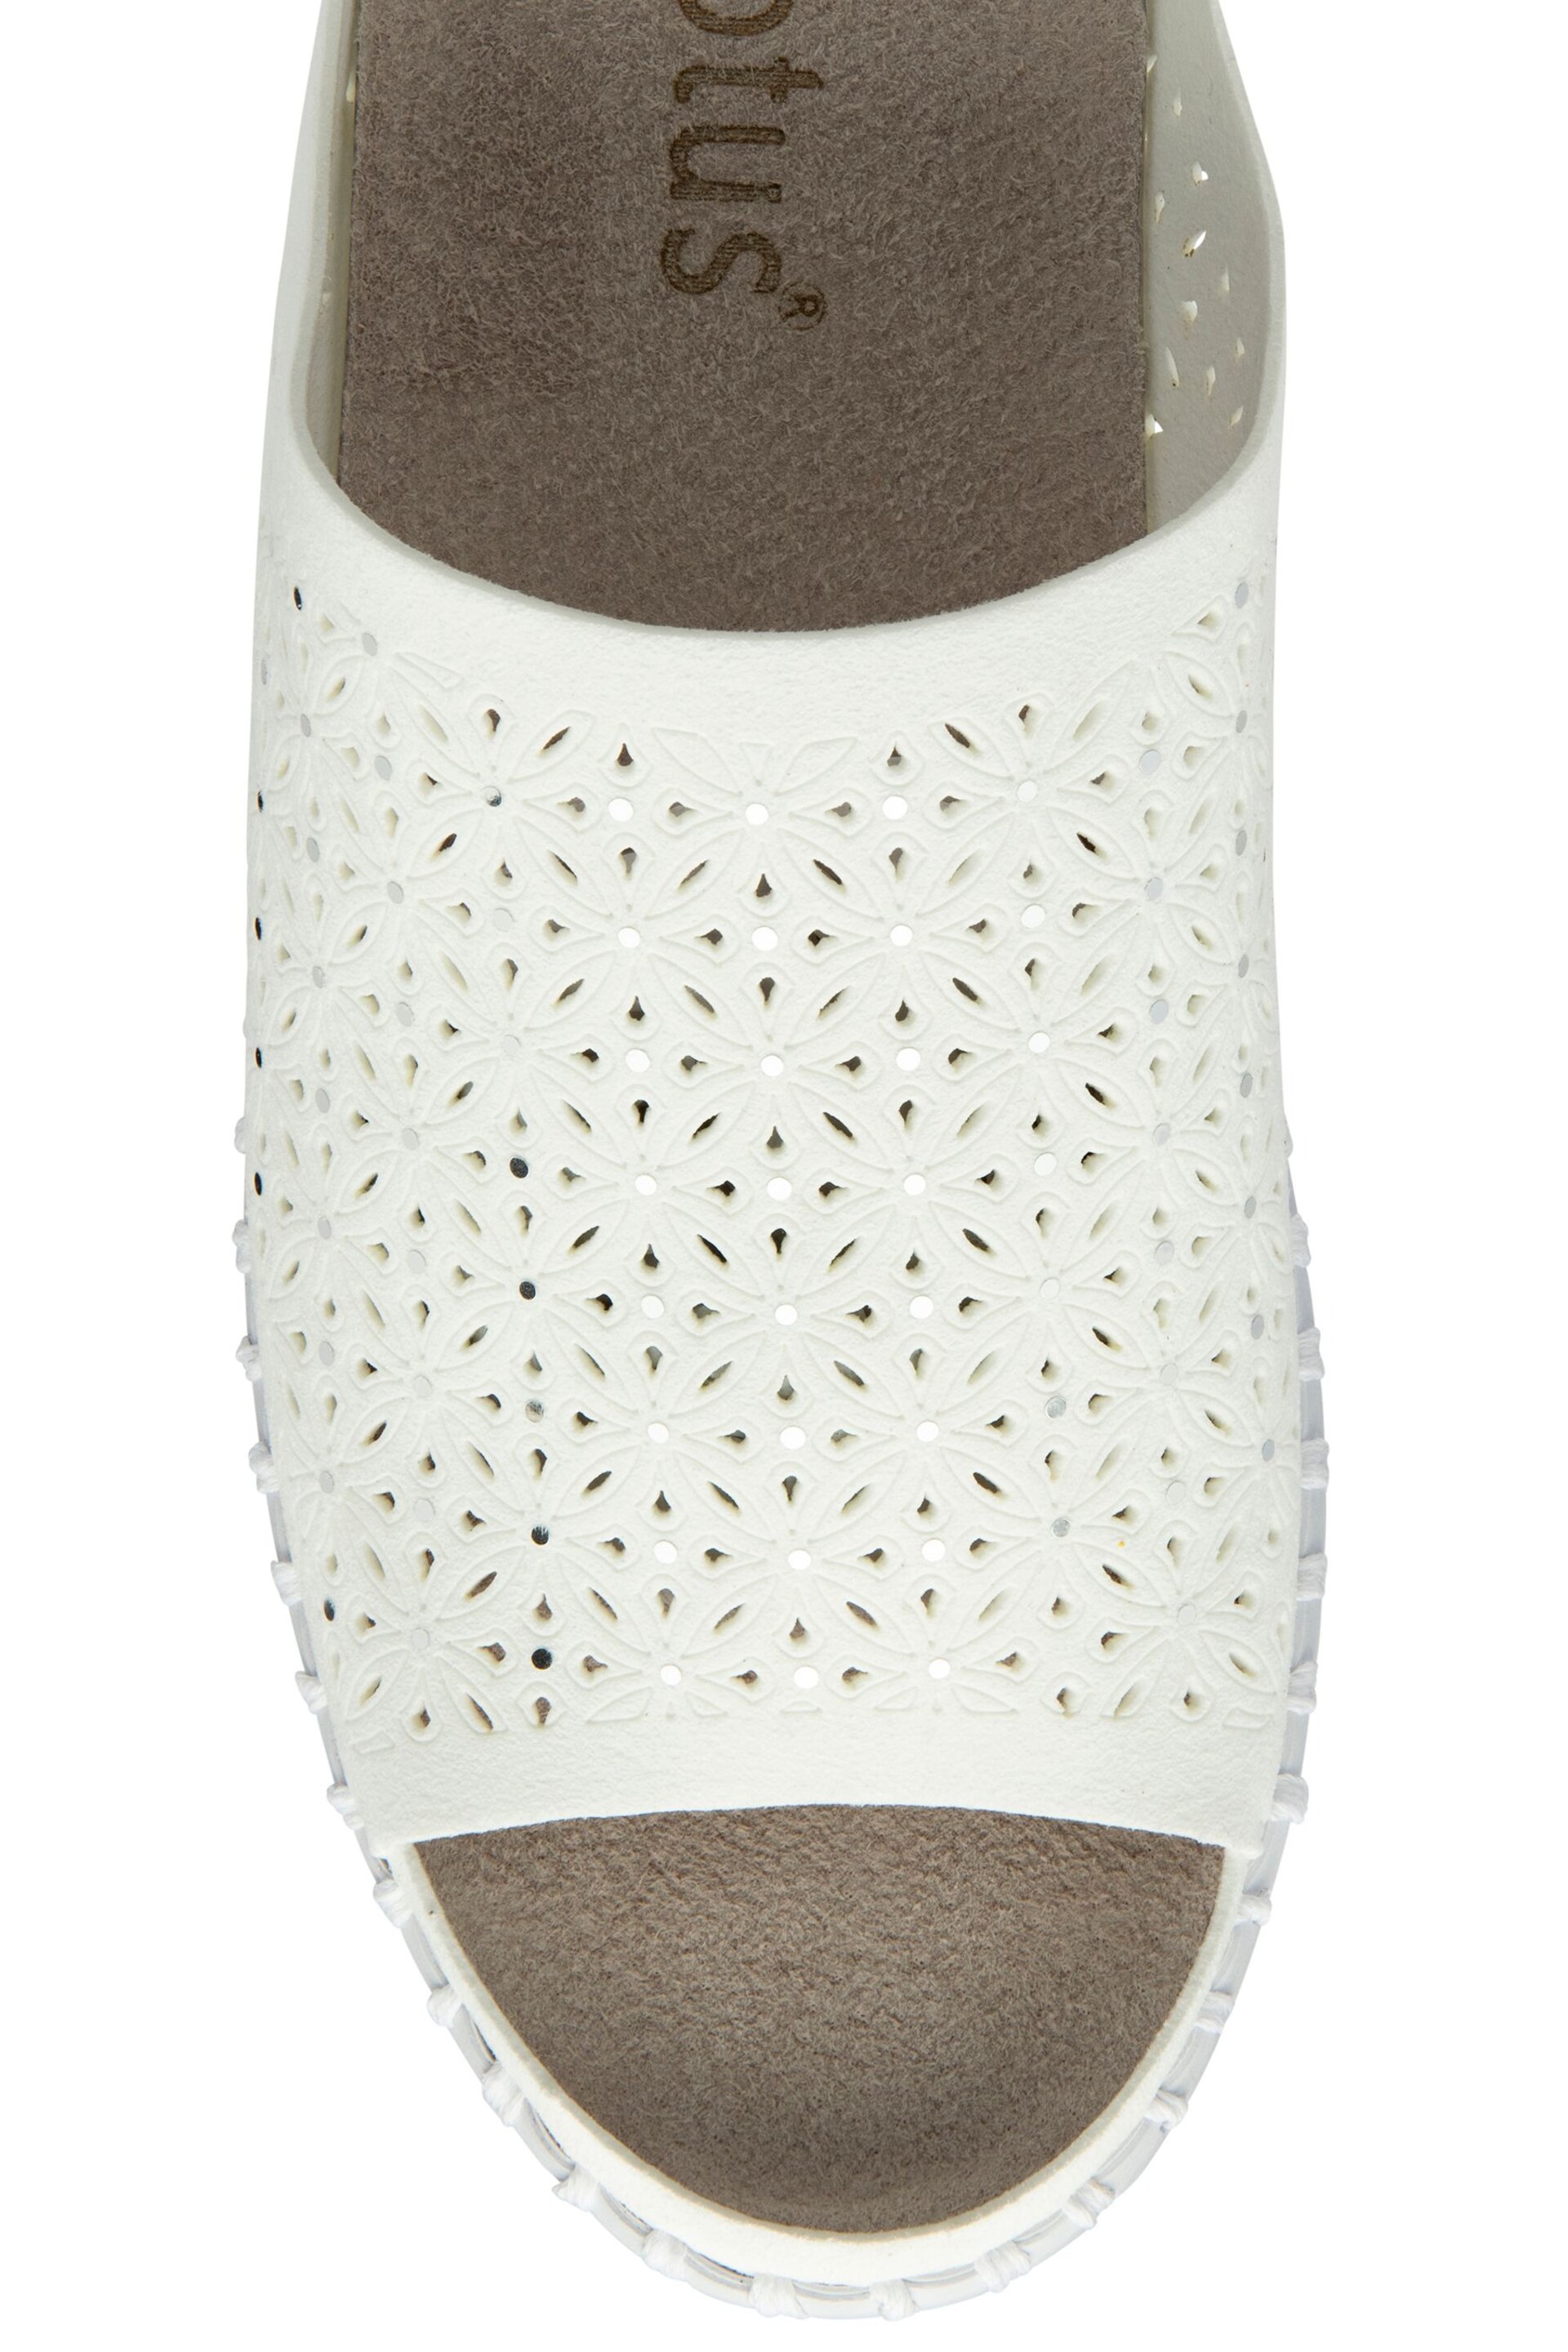 Lotus White Open Toe Mule Sandals - Image 4 of 4